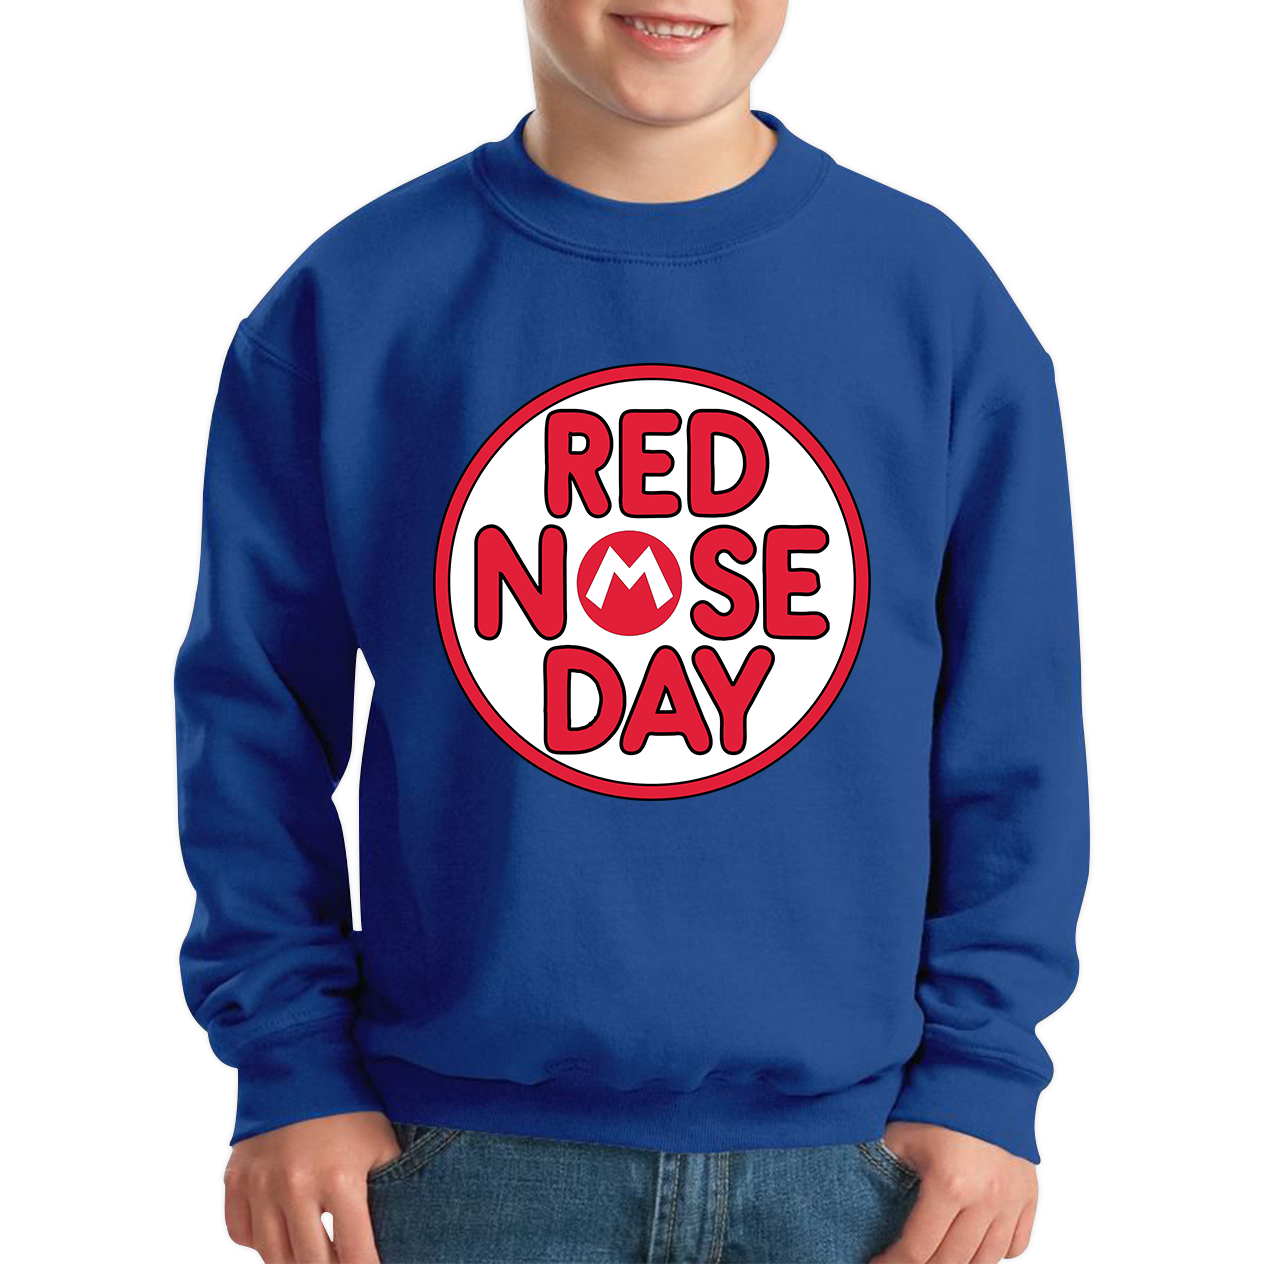 Super Mario Red Nose Day Kids Sweatshirt. 50% Goes To Charity